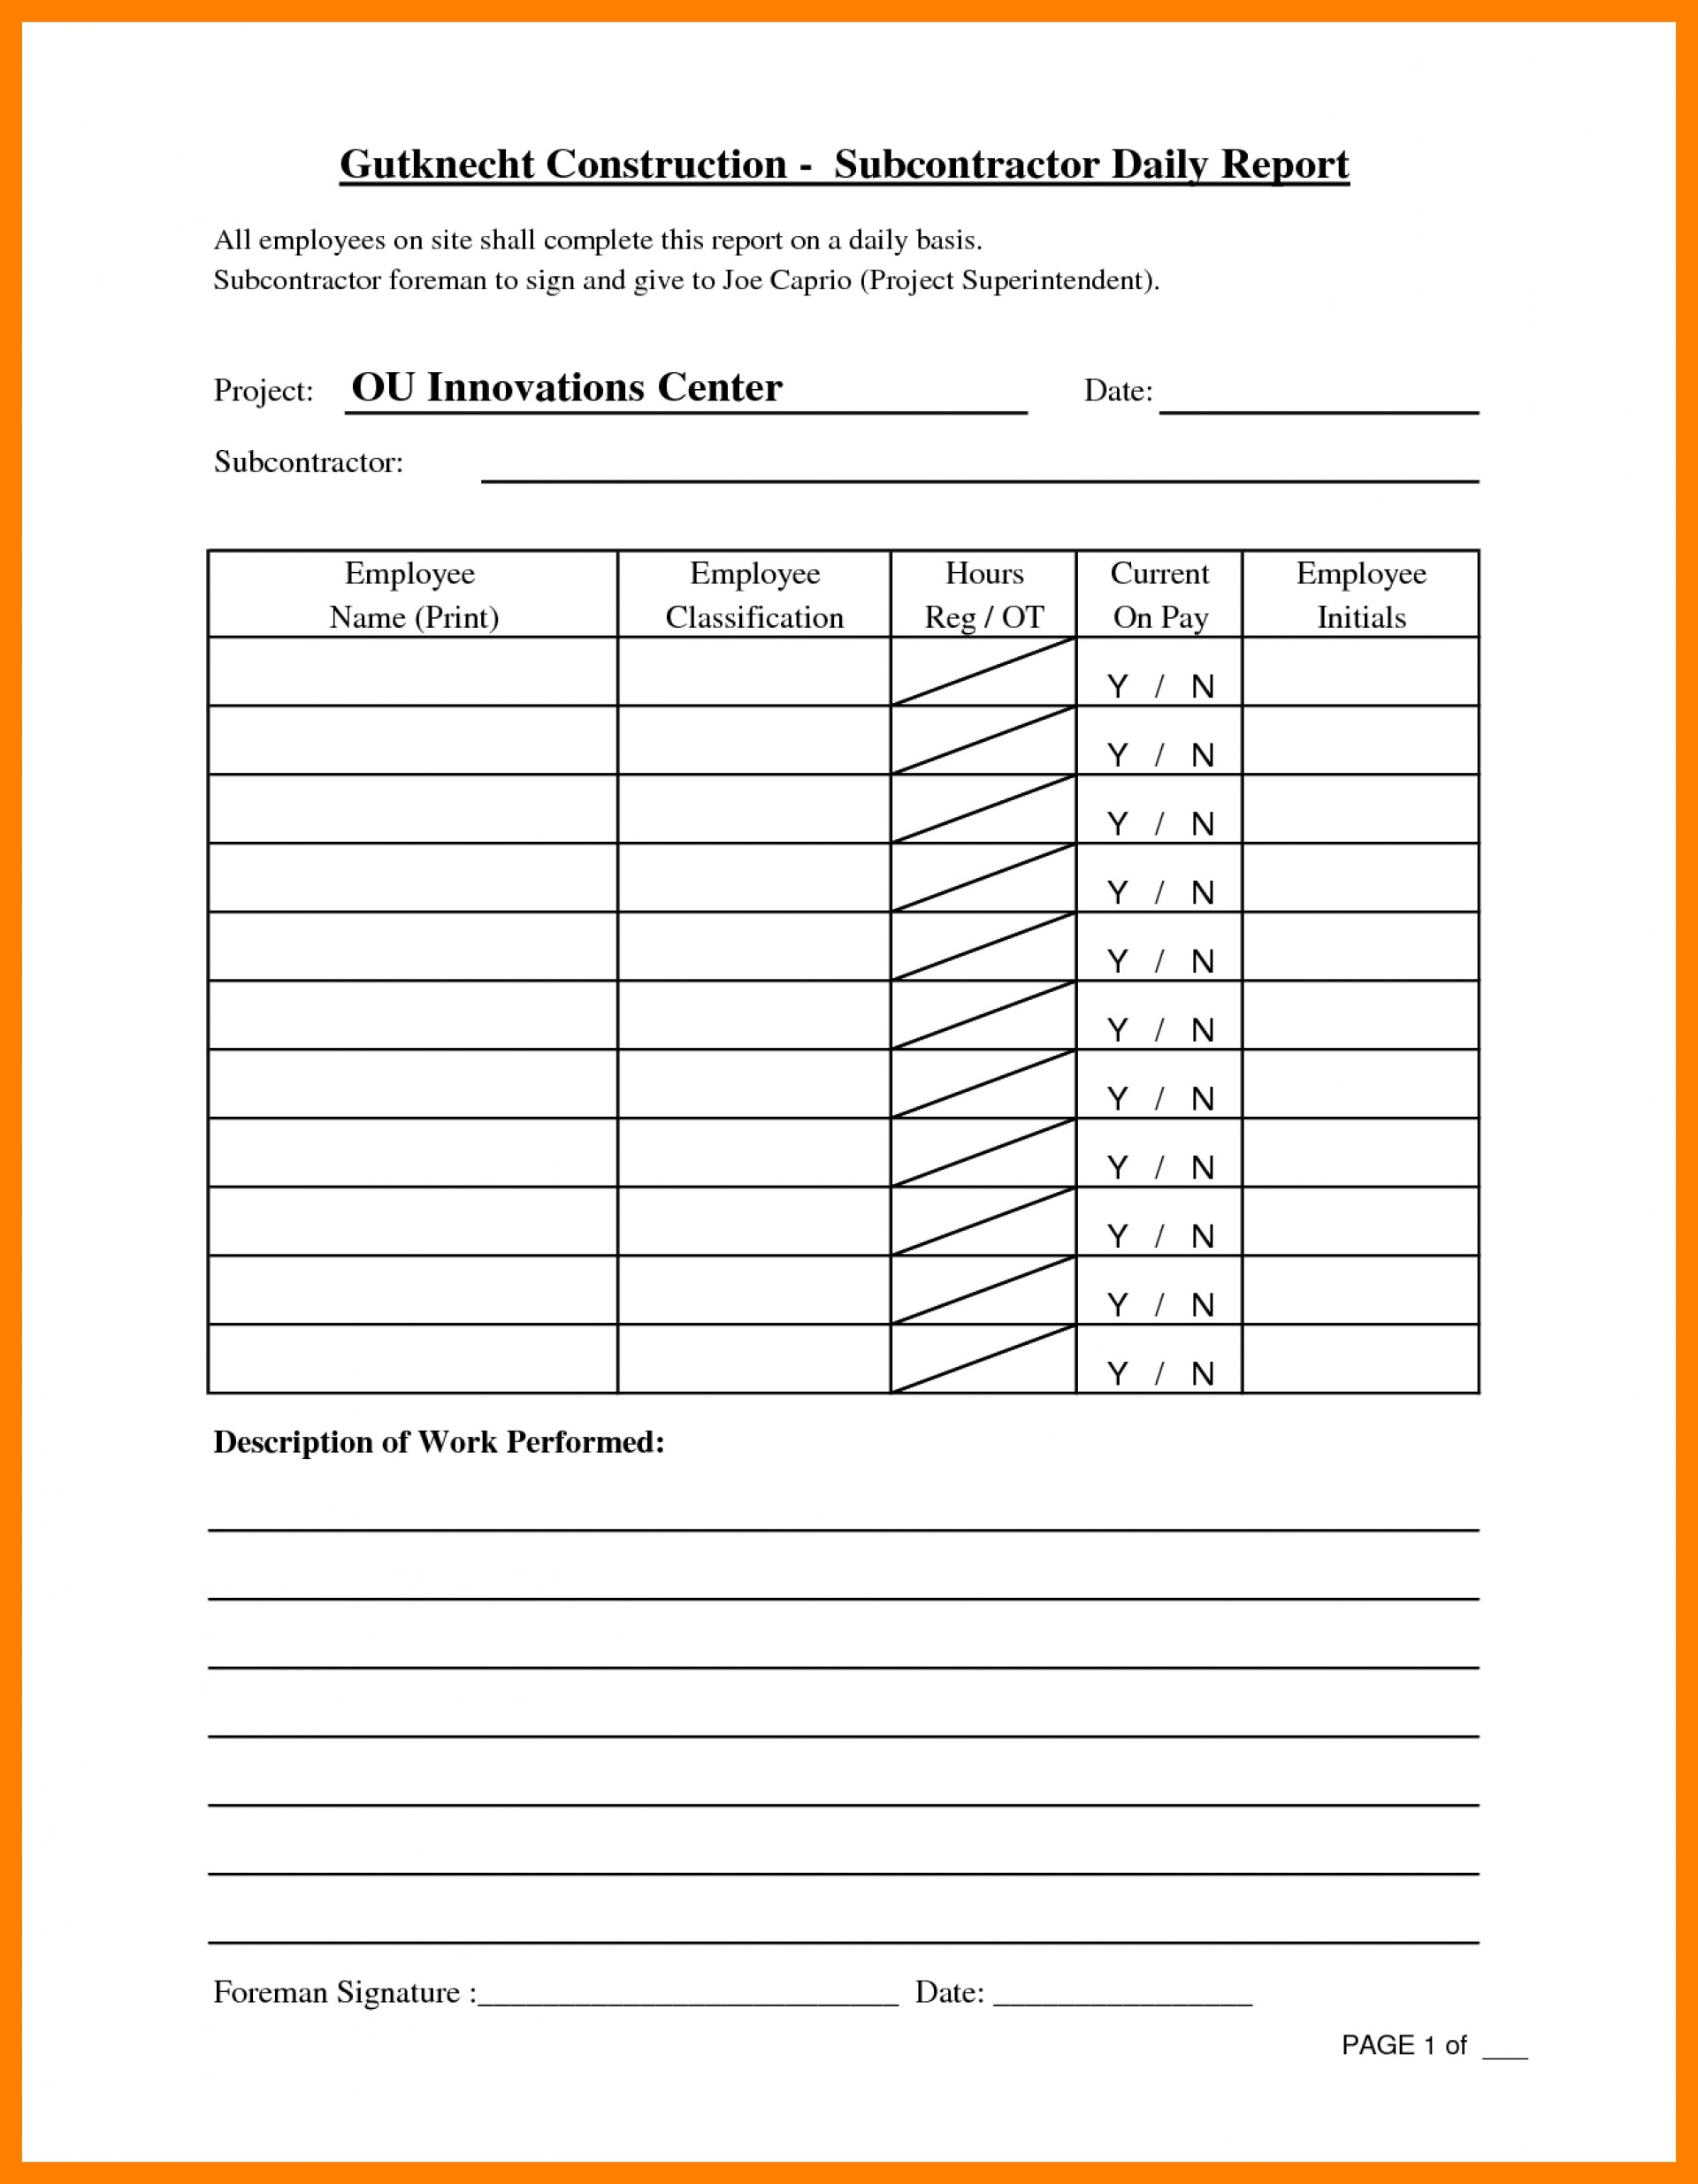 019 Image8 Daily Work Report Template Dreaded Ideas Format With Regard To Daily Work Report Template